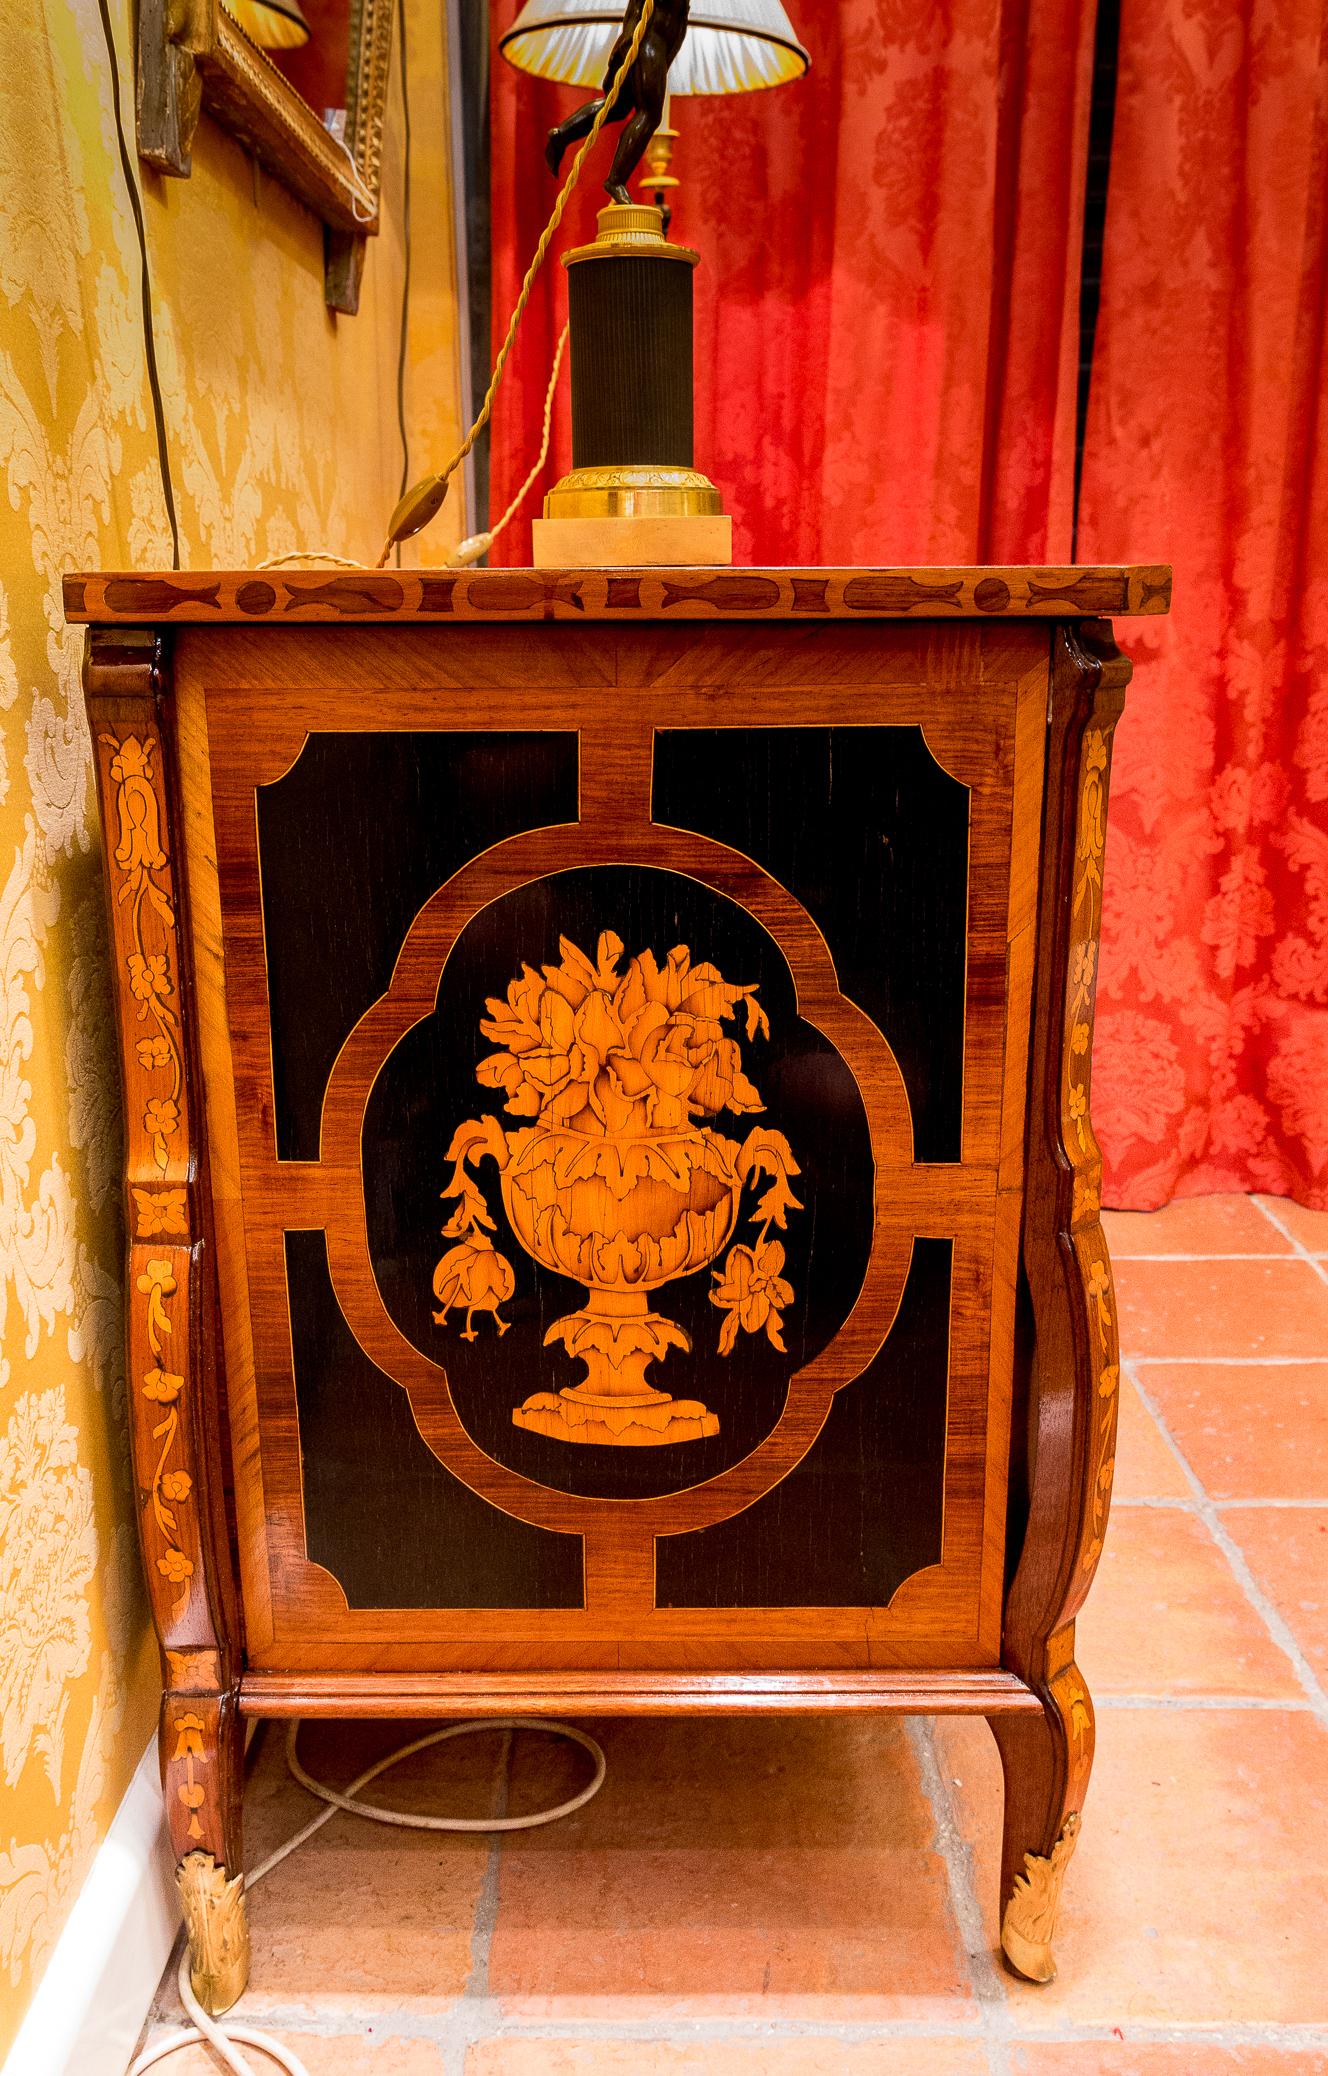 Early 18th Century French Marquetry Mazarine Commode (Louis XIV.)